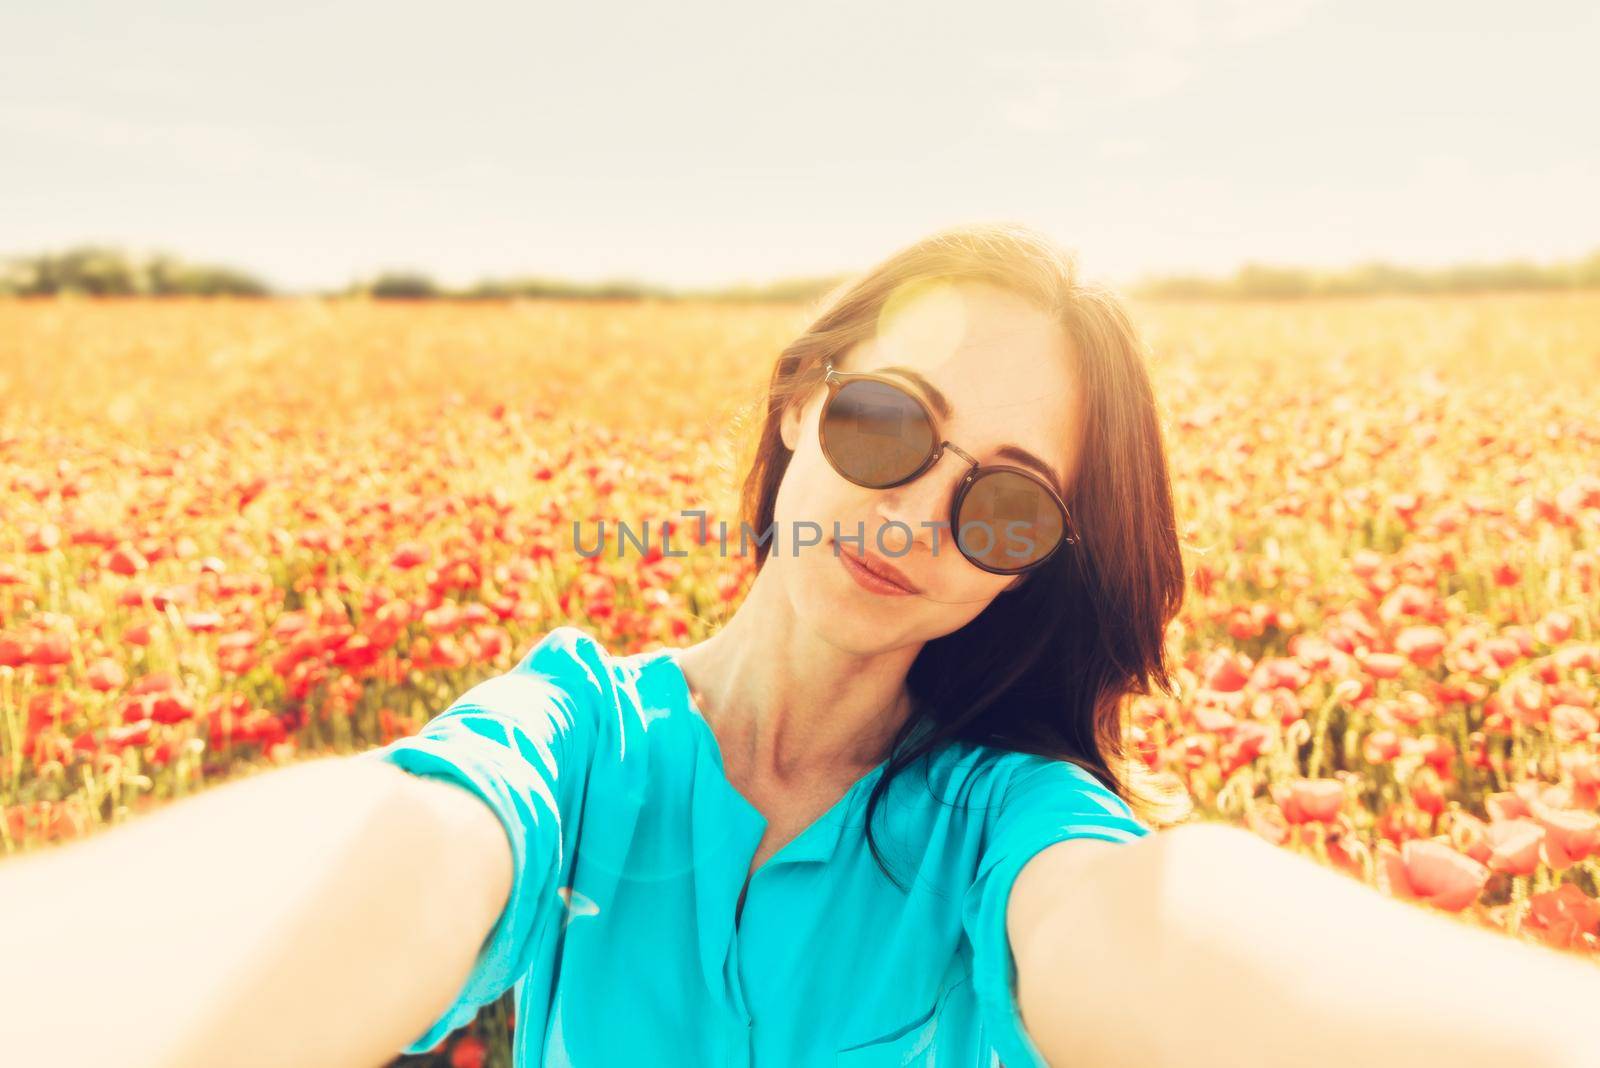 Smiling young woman in sunglasses taking selfie on background of poppies flower meadow, point of view.